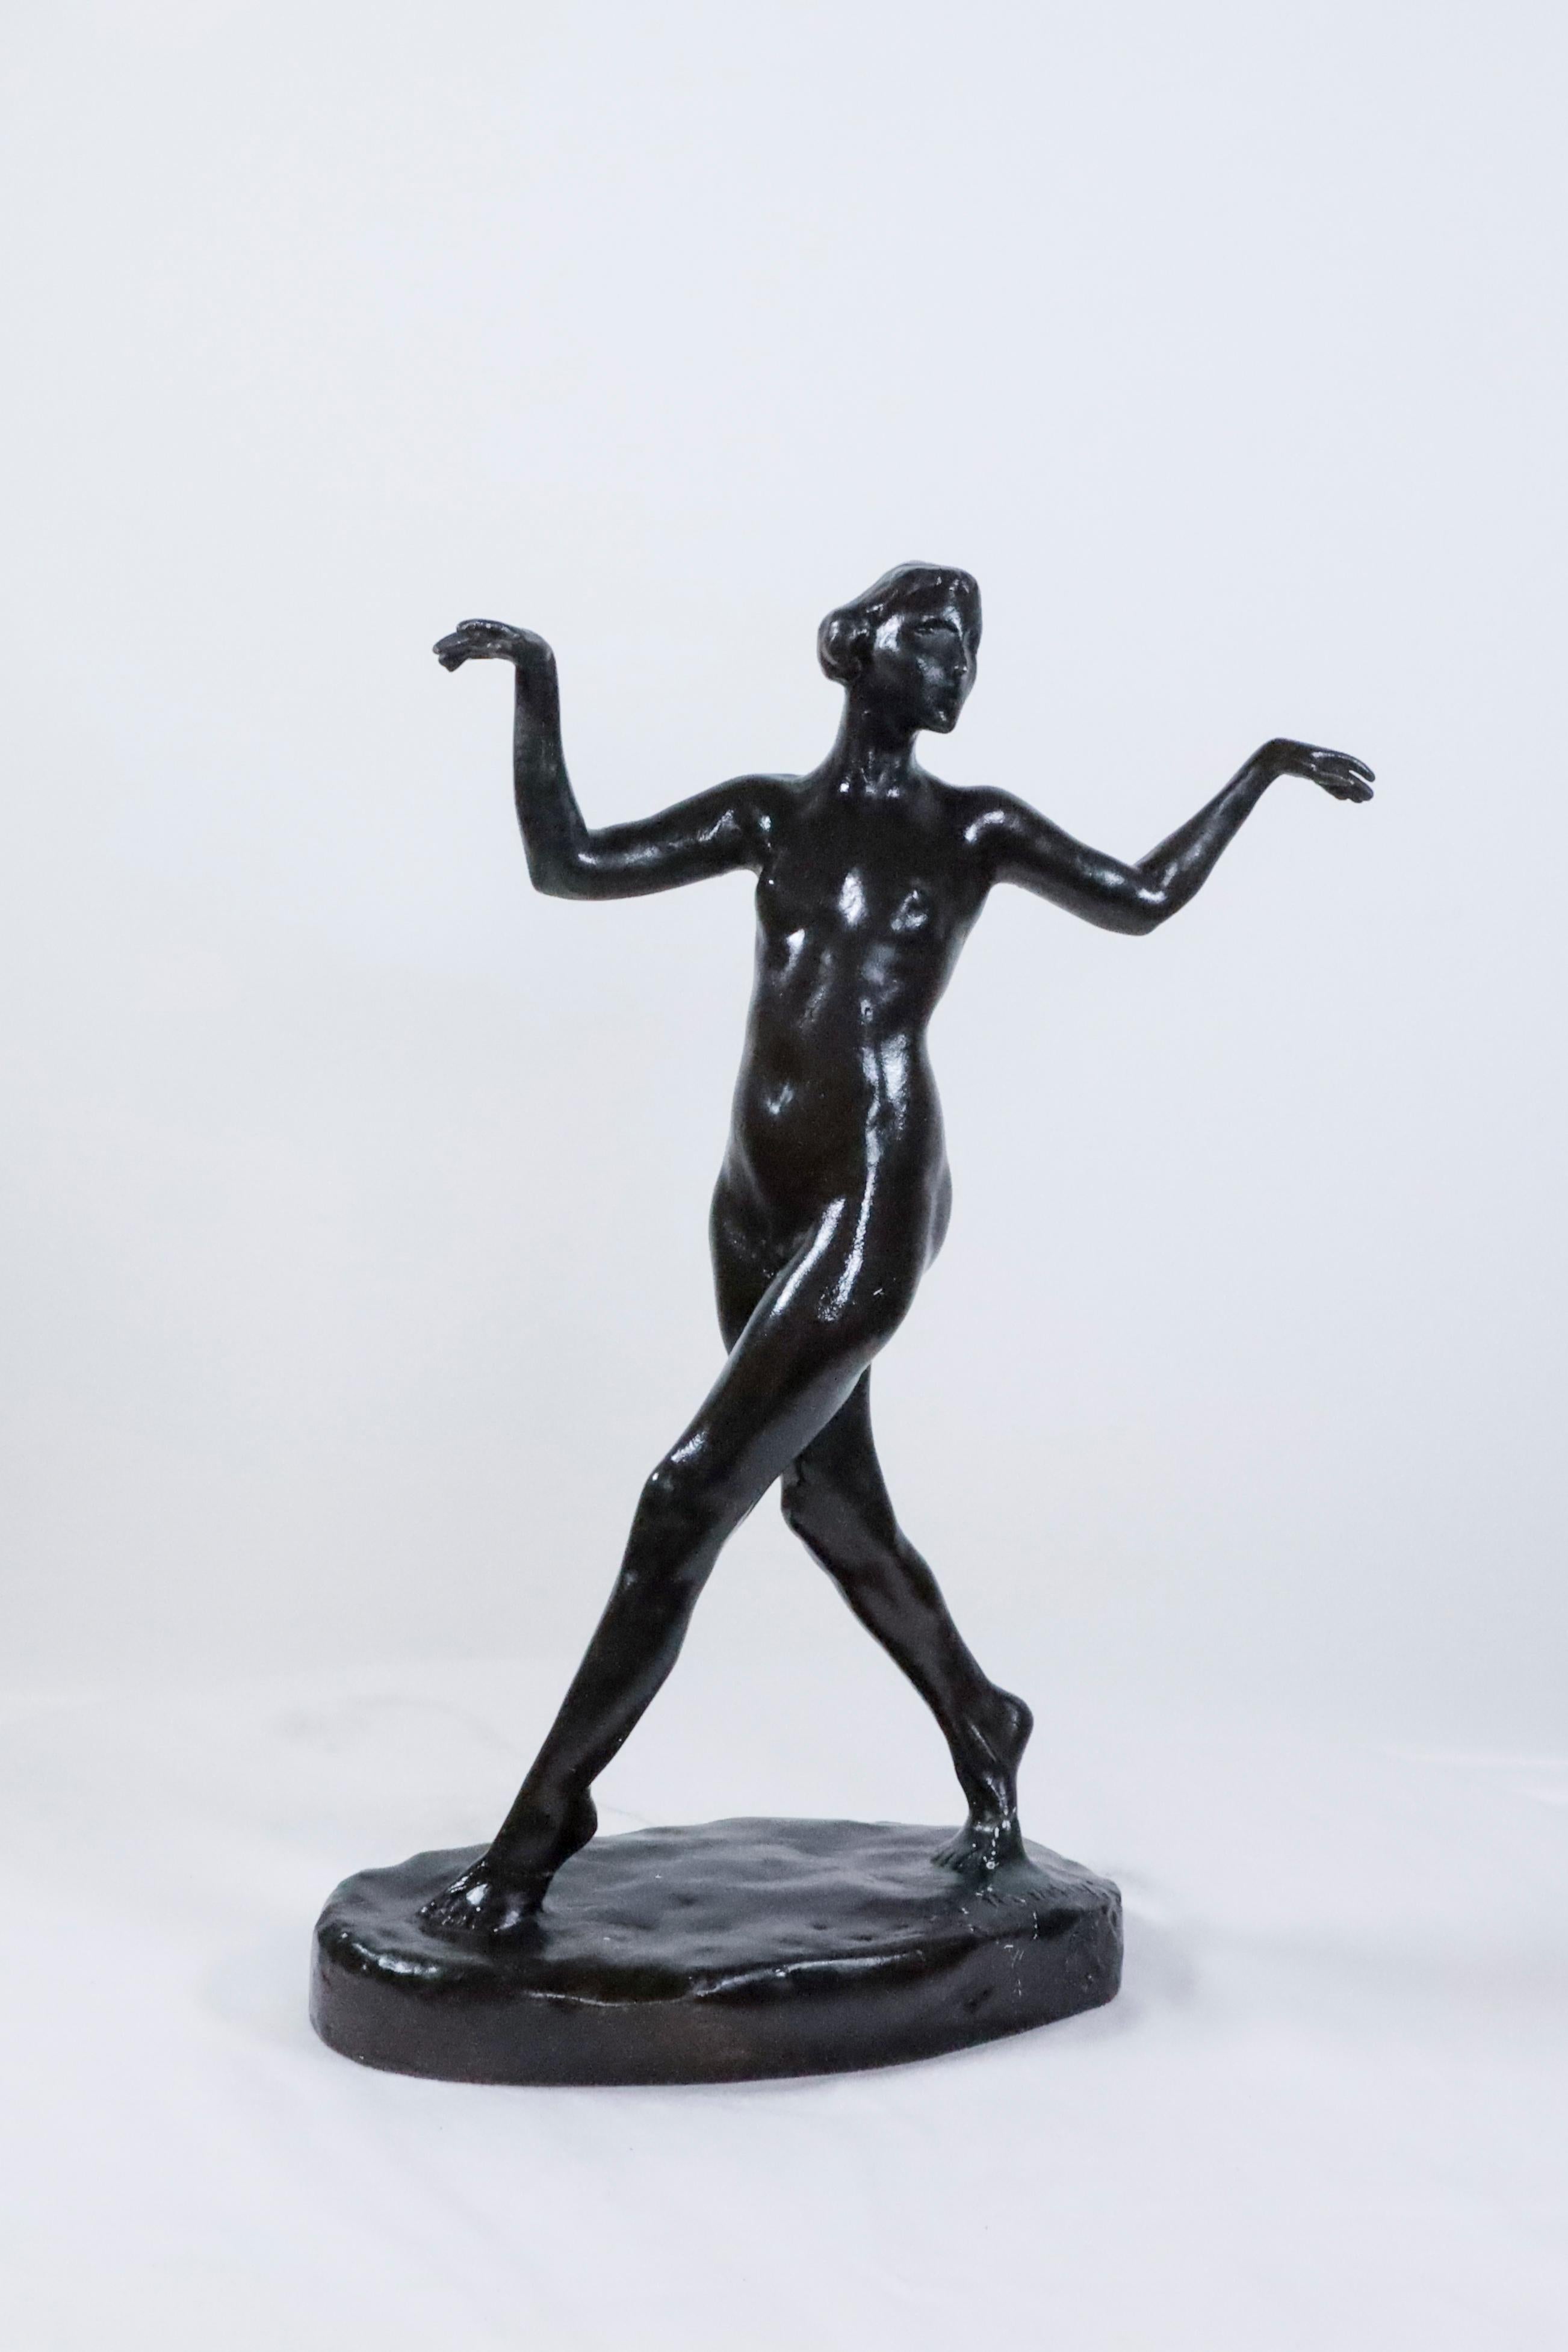 Charles Cary Rumsey Figurative Sculpture - Dancing Nude Bronze of a Woman  "Femme Dansant, 1910"